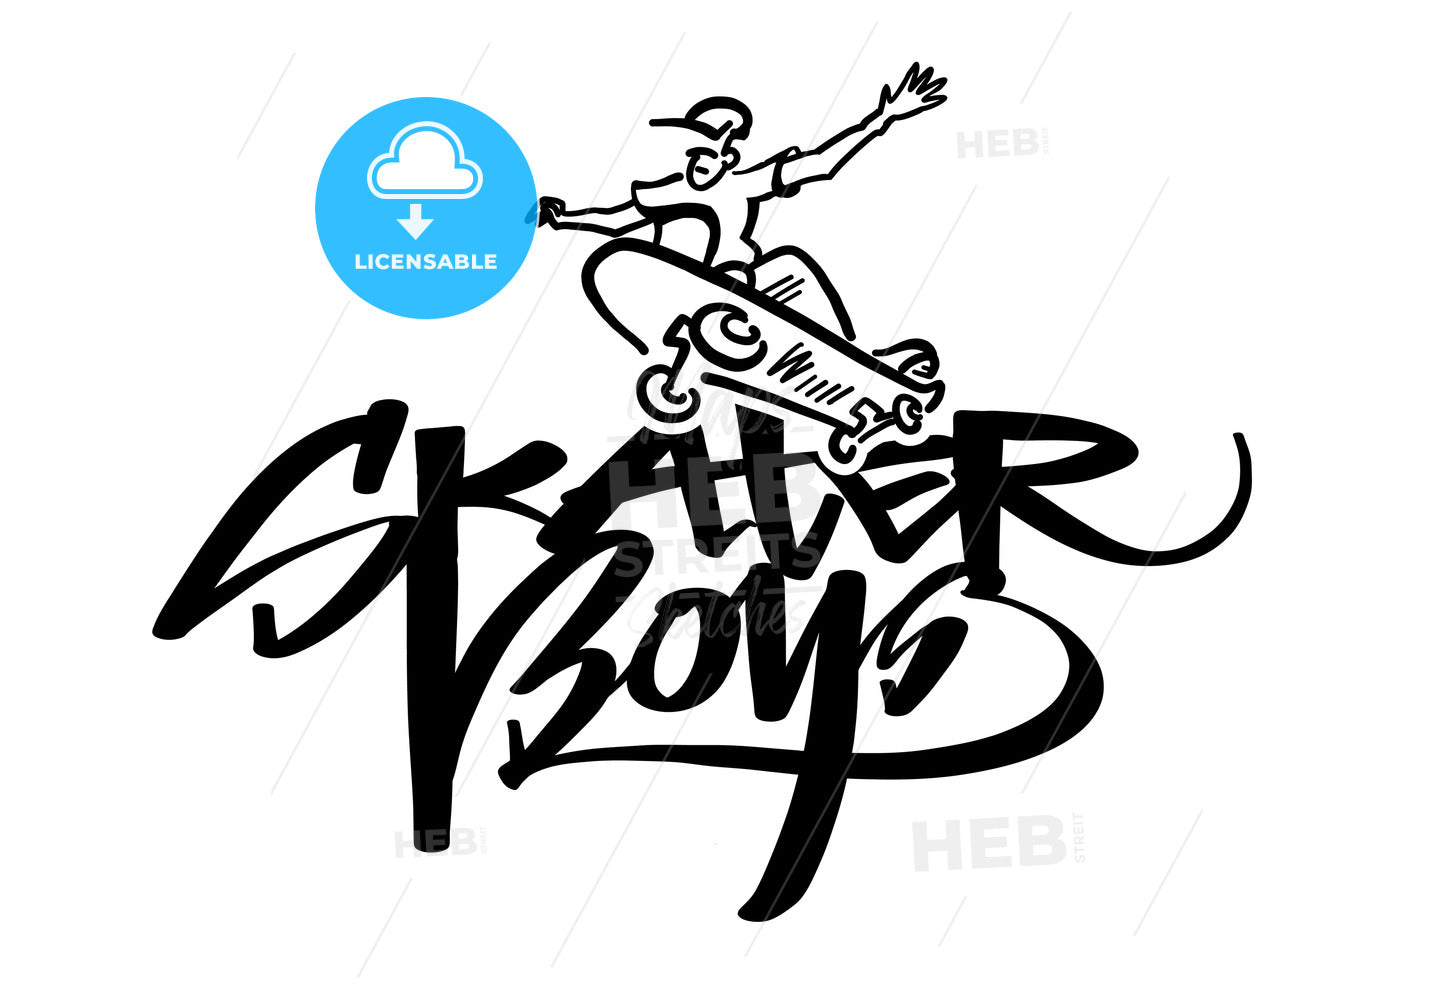 Skaterboys print template with icon – instant download